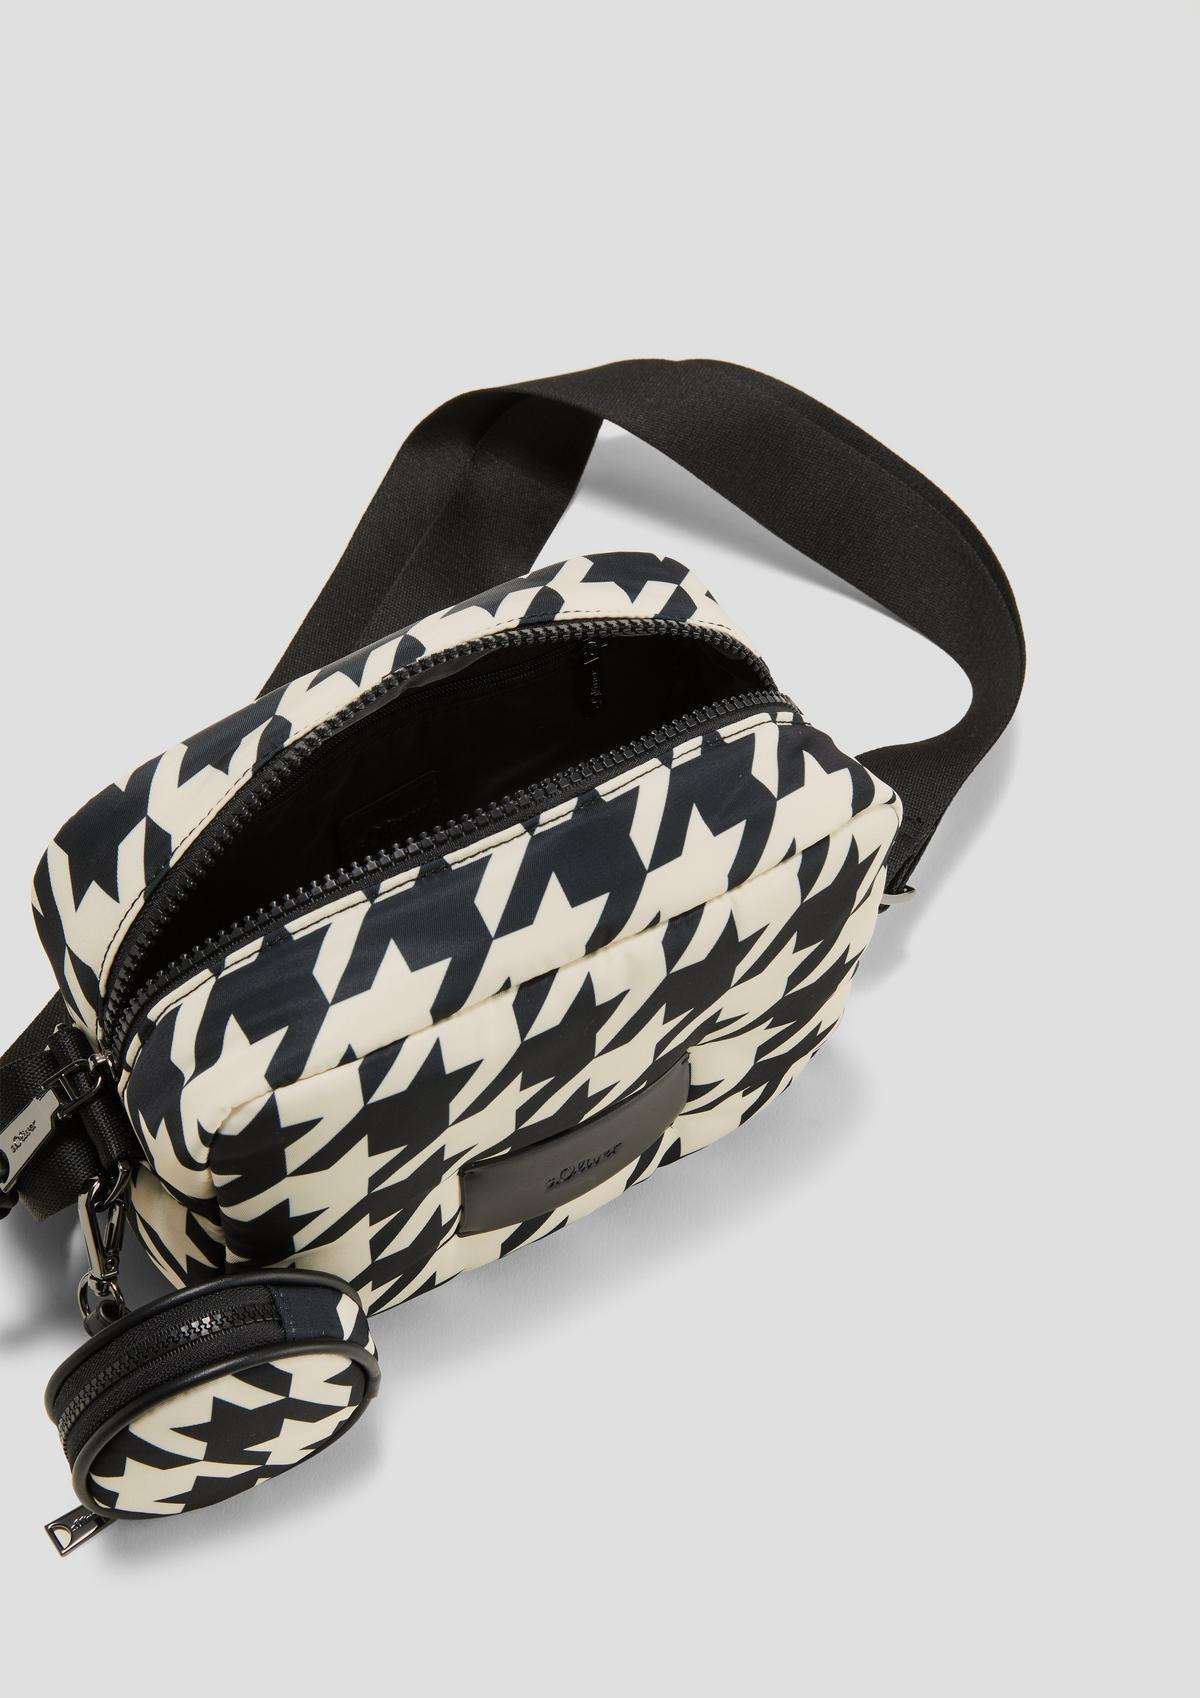 s.Oliver Cross-body bag with a houndstooth pattern